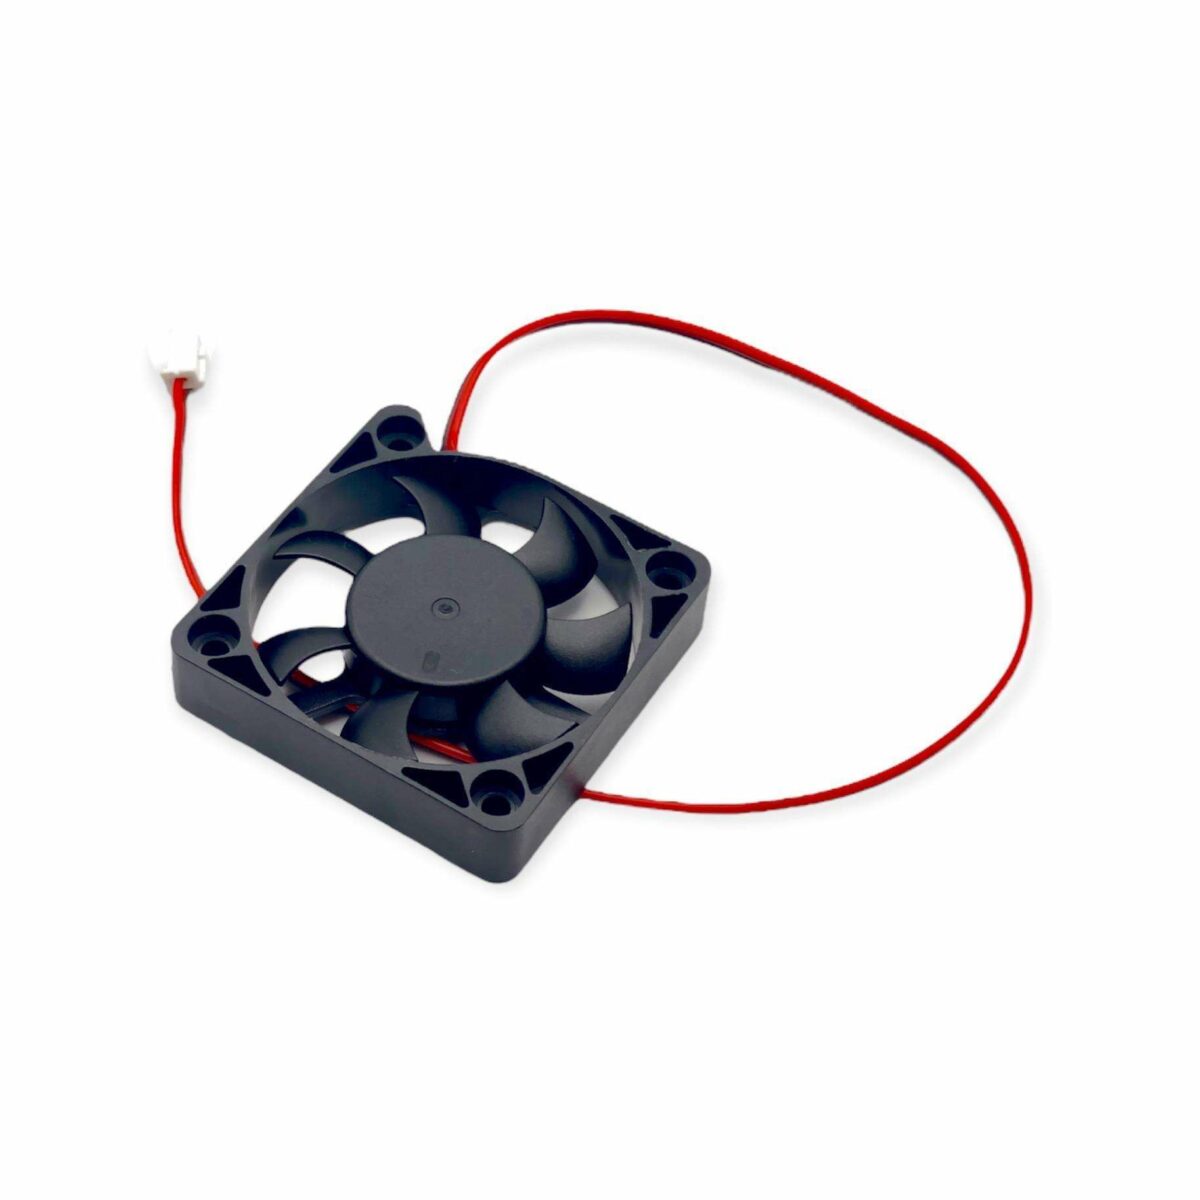 Photo of Replacement Fan for QSC KW153, K10, K12 [WP-000367-00] at Analog Classics